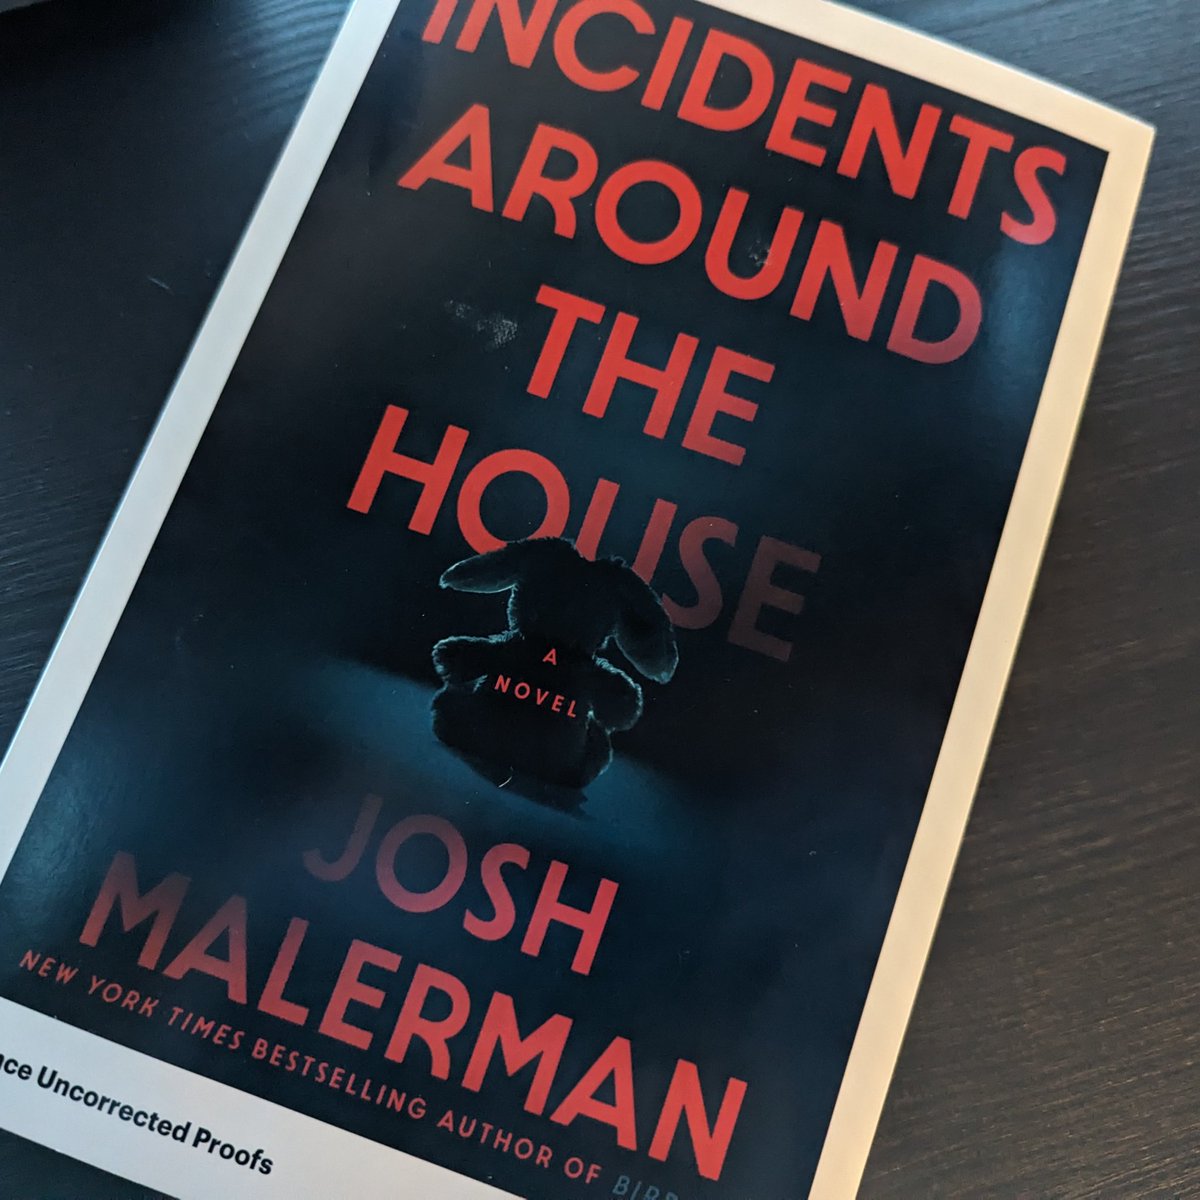 Got my hands on an ARC of @JoshMalerman's Incidents Around the House and... Holy shit. I finished it a couple days ago and I just still feel profoundly *unsettled*.